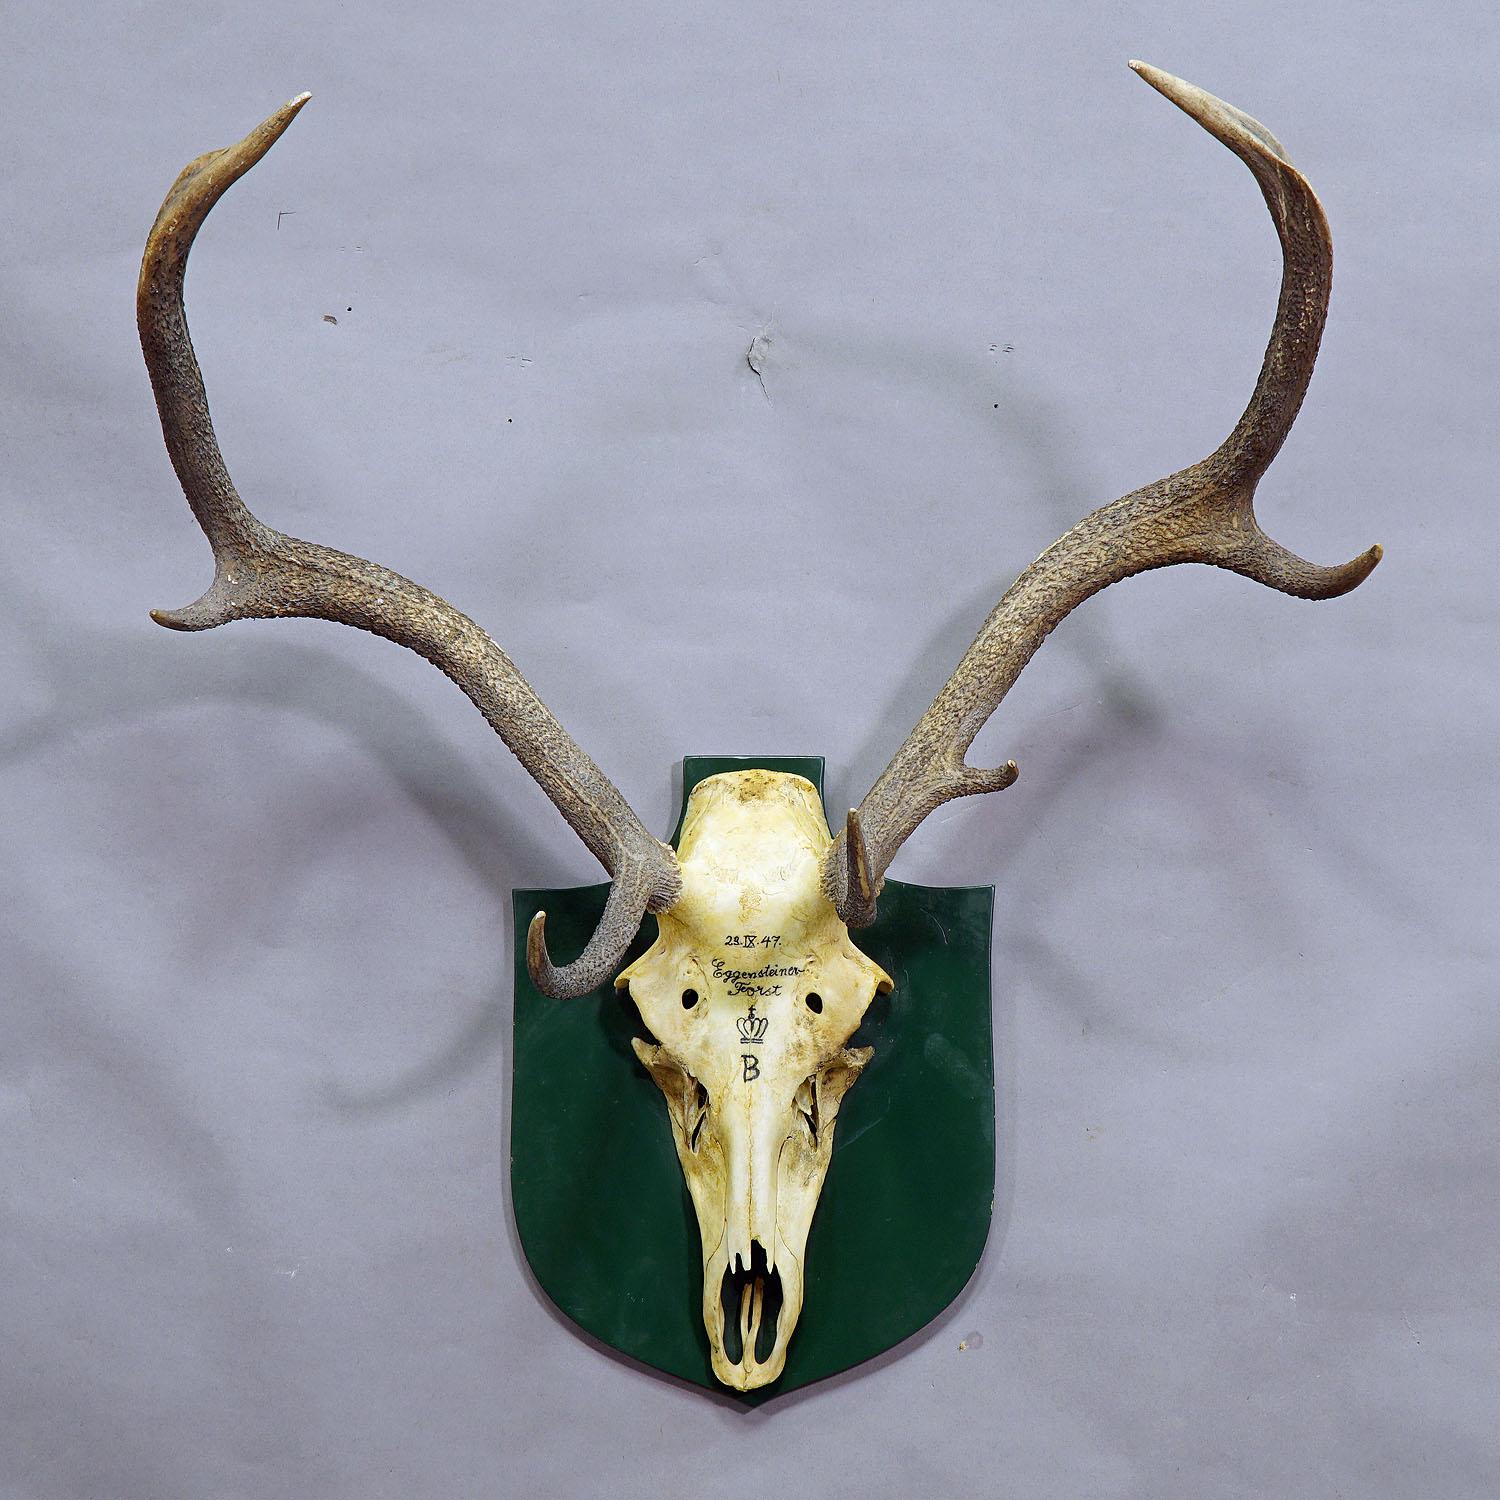 An uneven 10 pointer Black Forest deer trophy from the palace of salem in South Germany. shoot by a member of the lordly family of Baden in 1947. Handwritten inscriptions on the skull with, place of the hunt, family crest and date. mounted on a